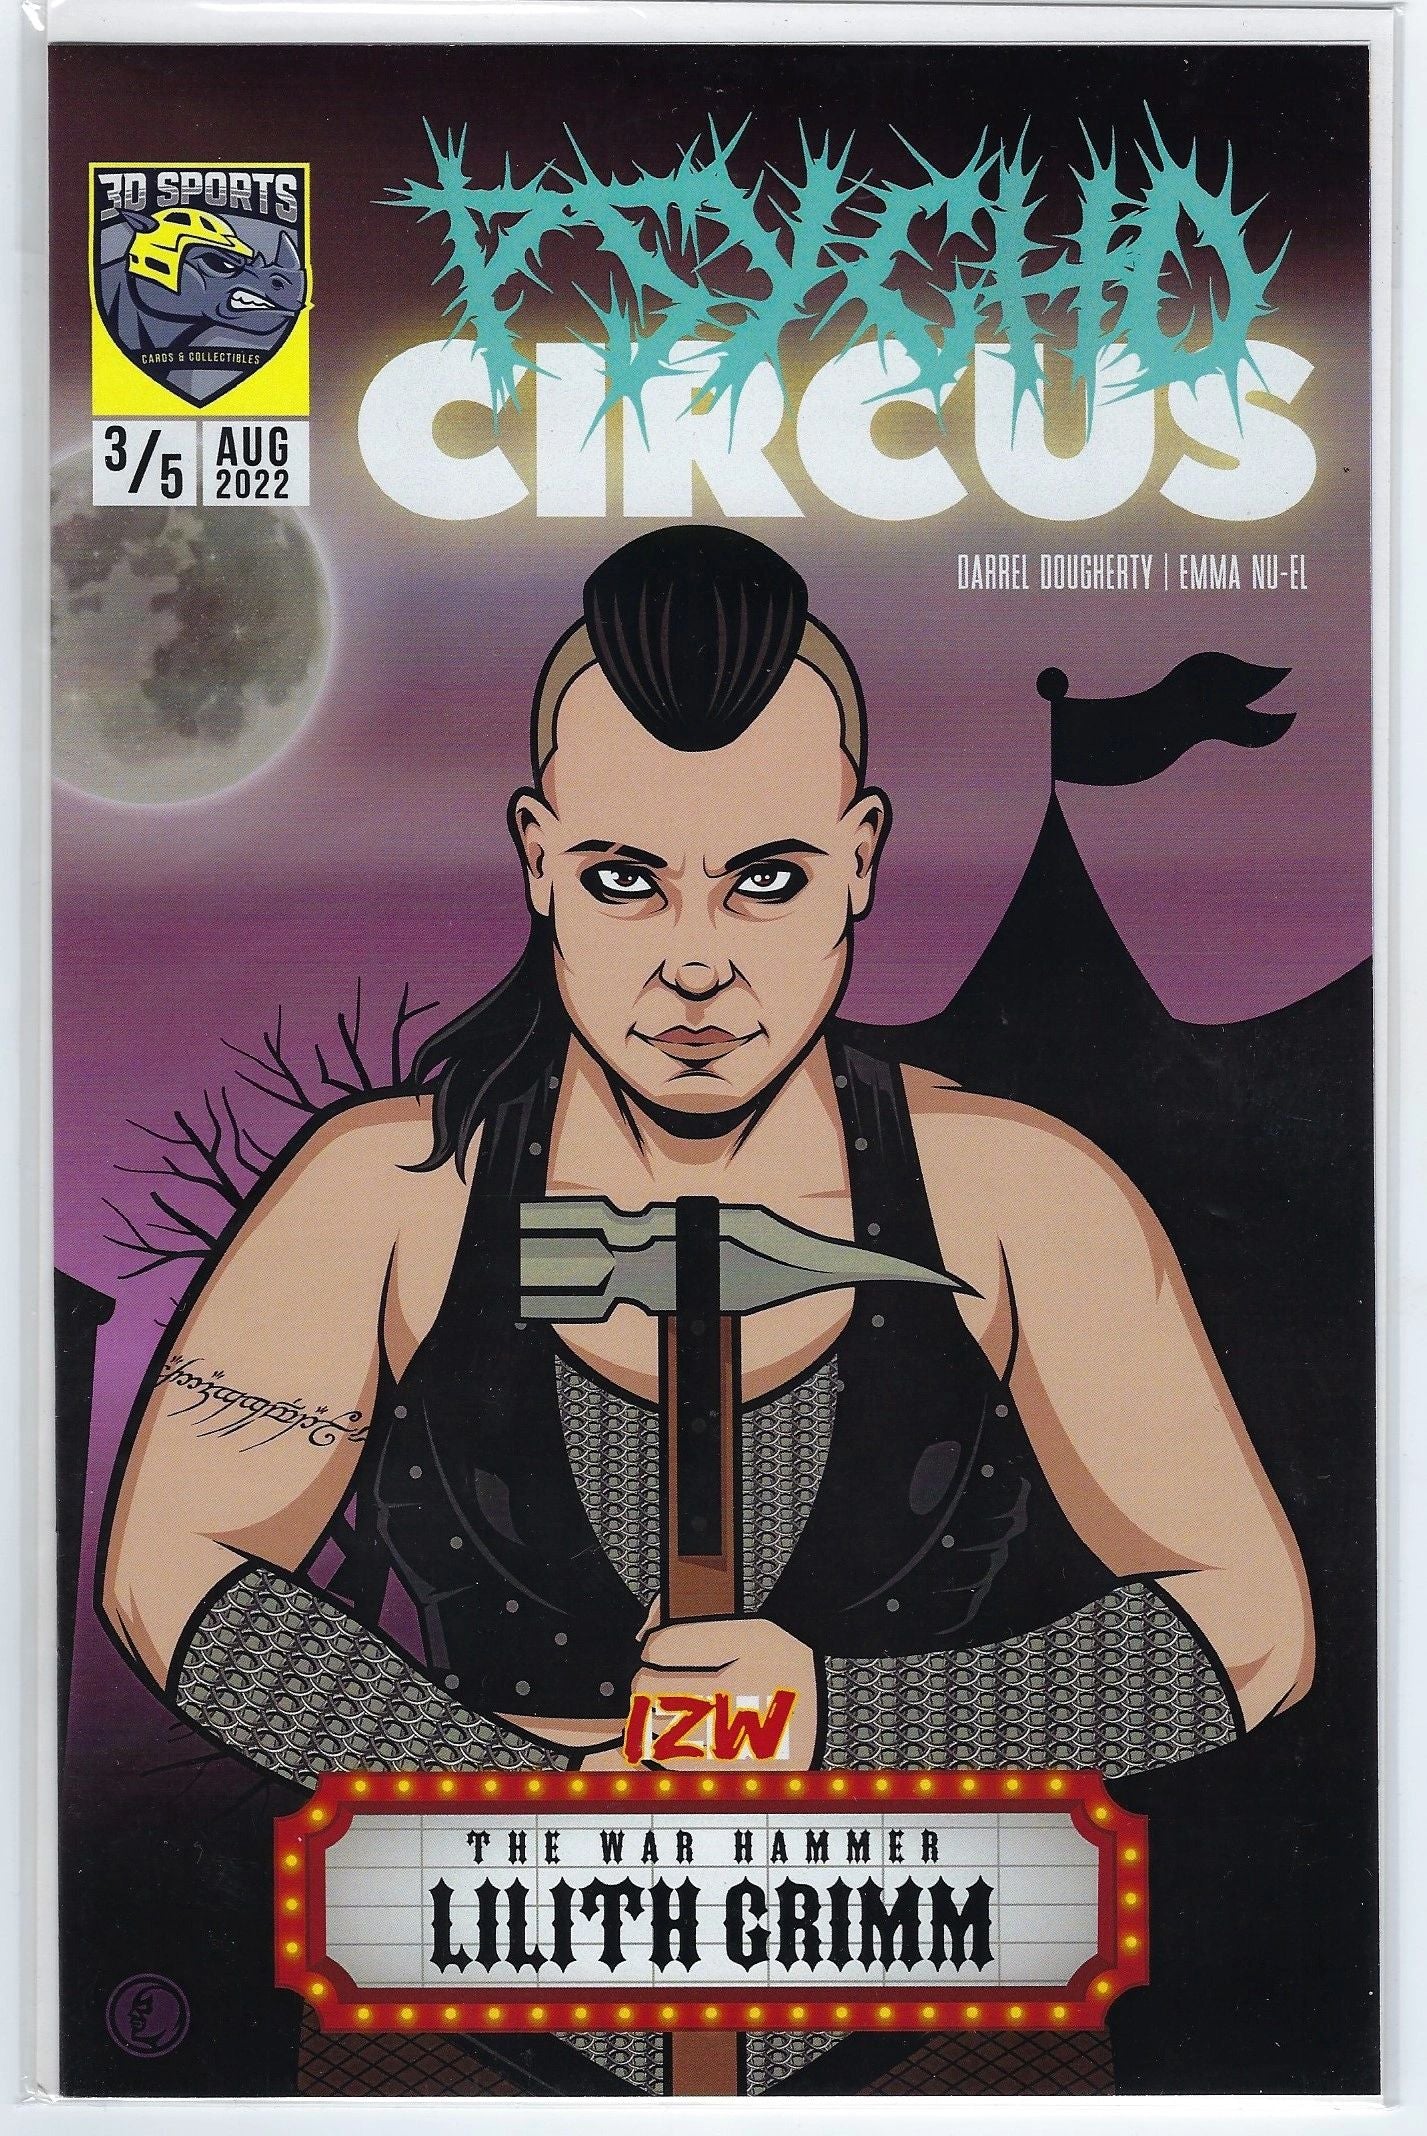 Lilith Grimm "The War Hammer" IZW Psycho Circus Comic Book Cover #3/5